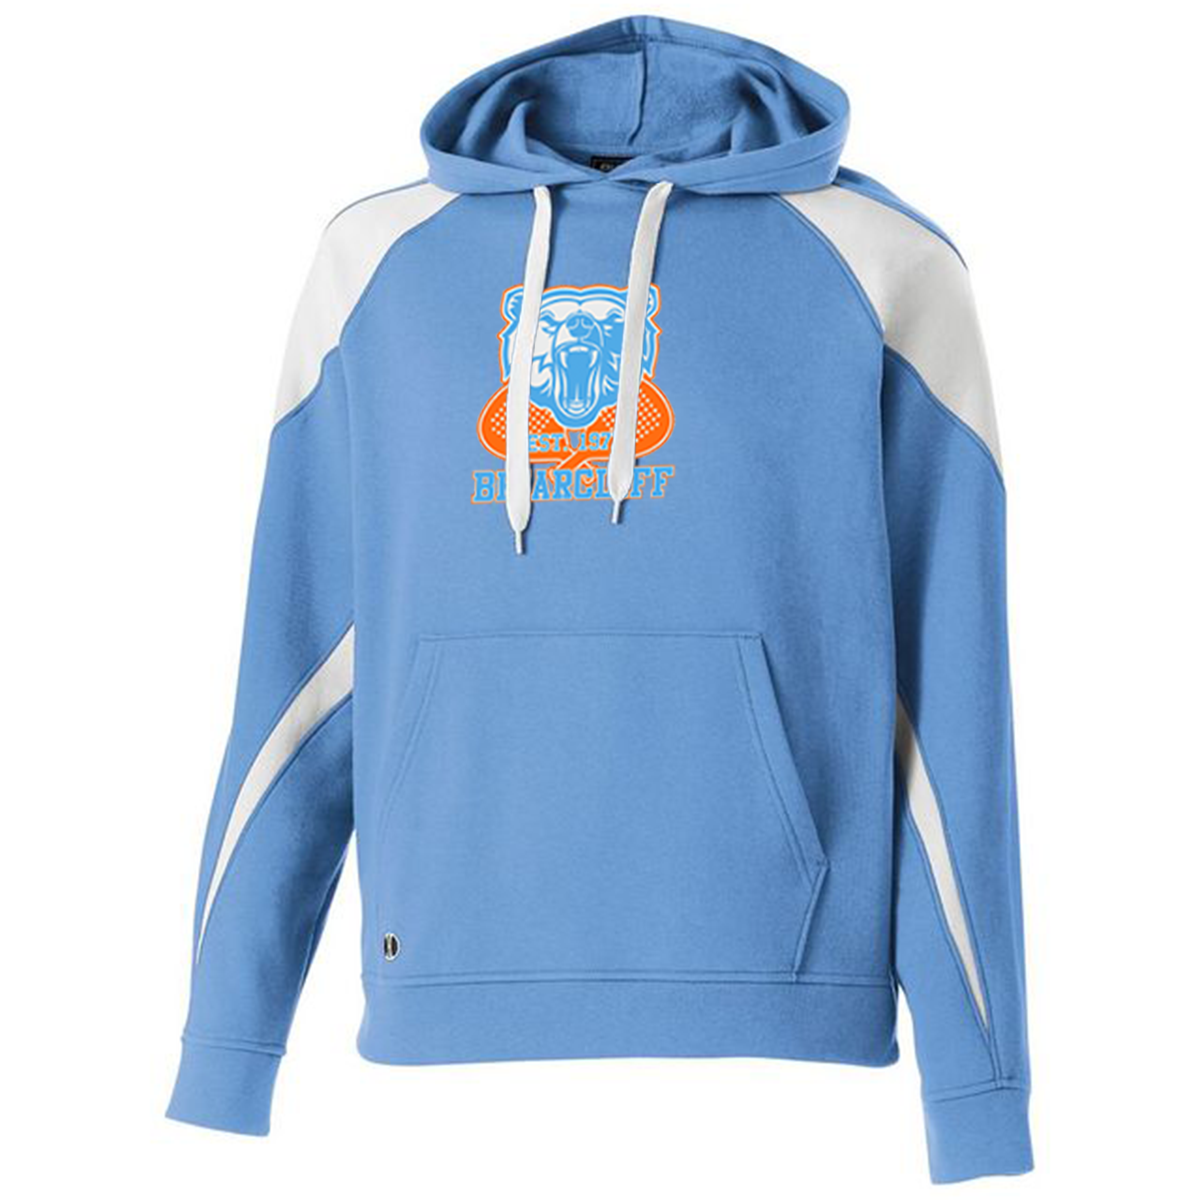 Briarcliff Paddle Prospect Hoodie